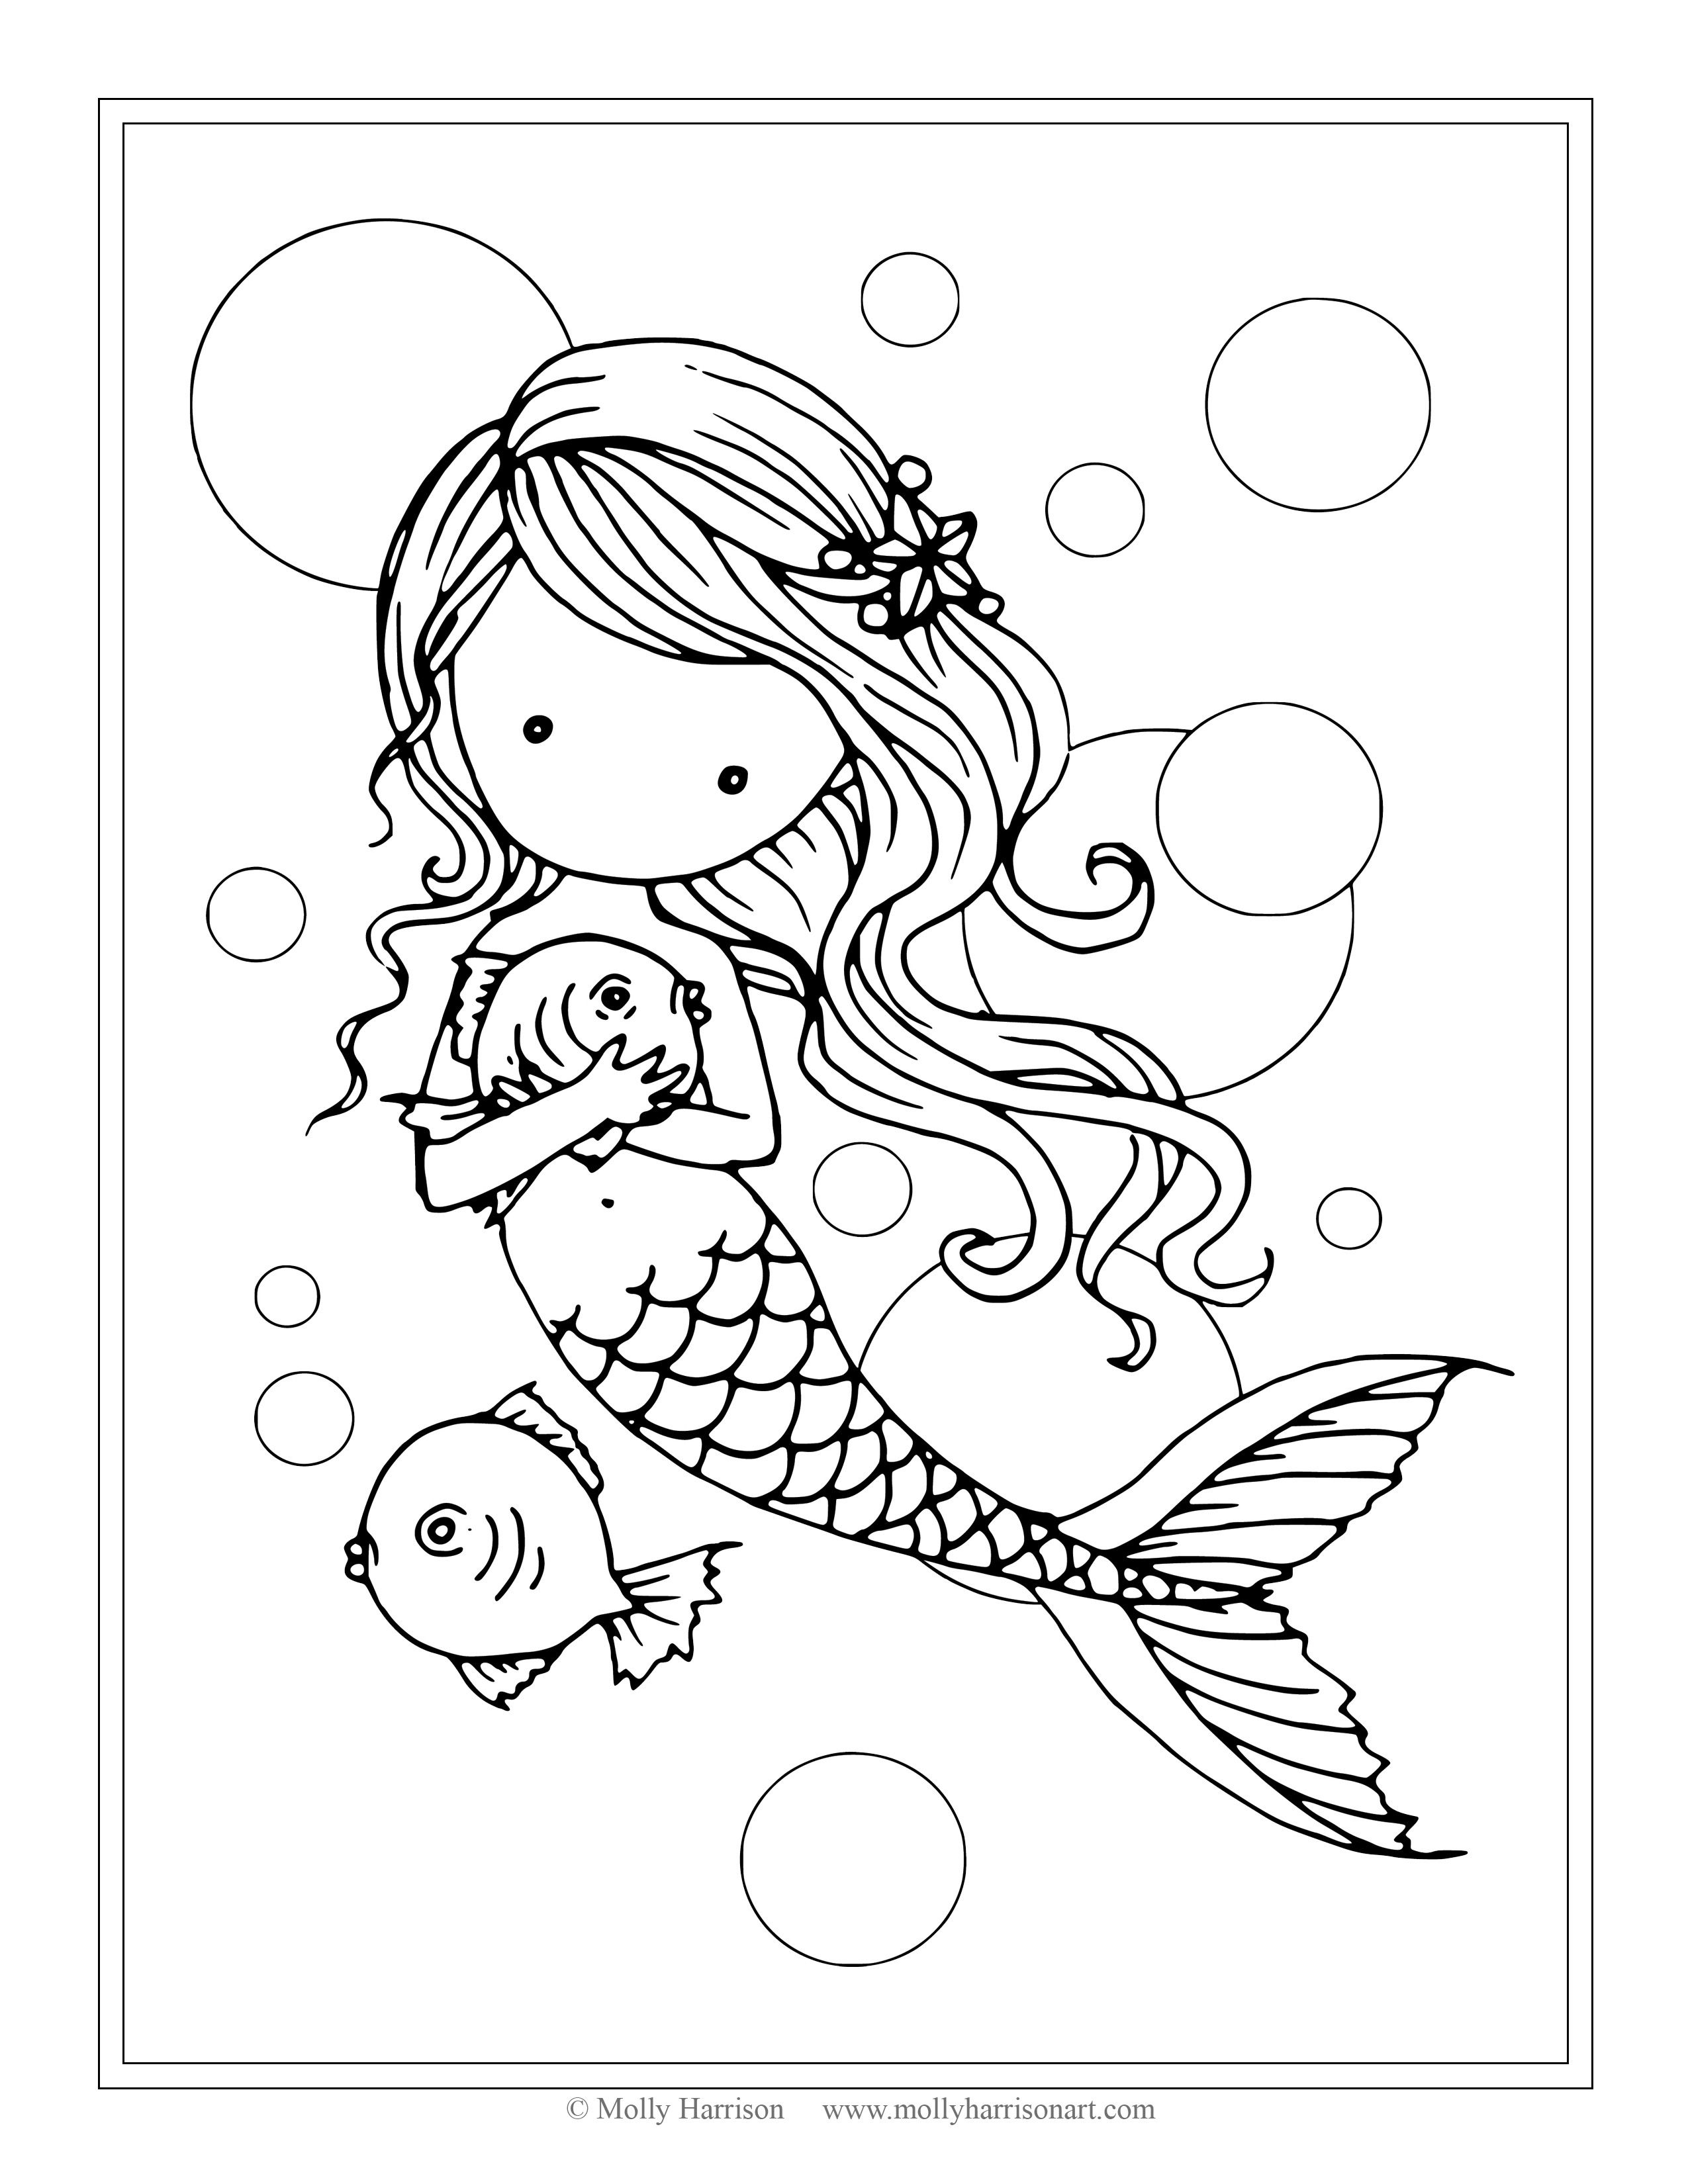 mermaid printable coloring pages free mermaid with fish coloring page by molly harrison pages printable coloring mermaid 